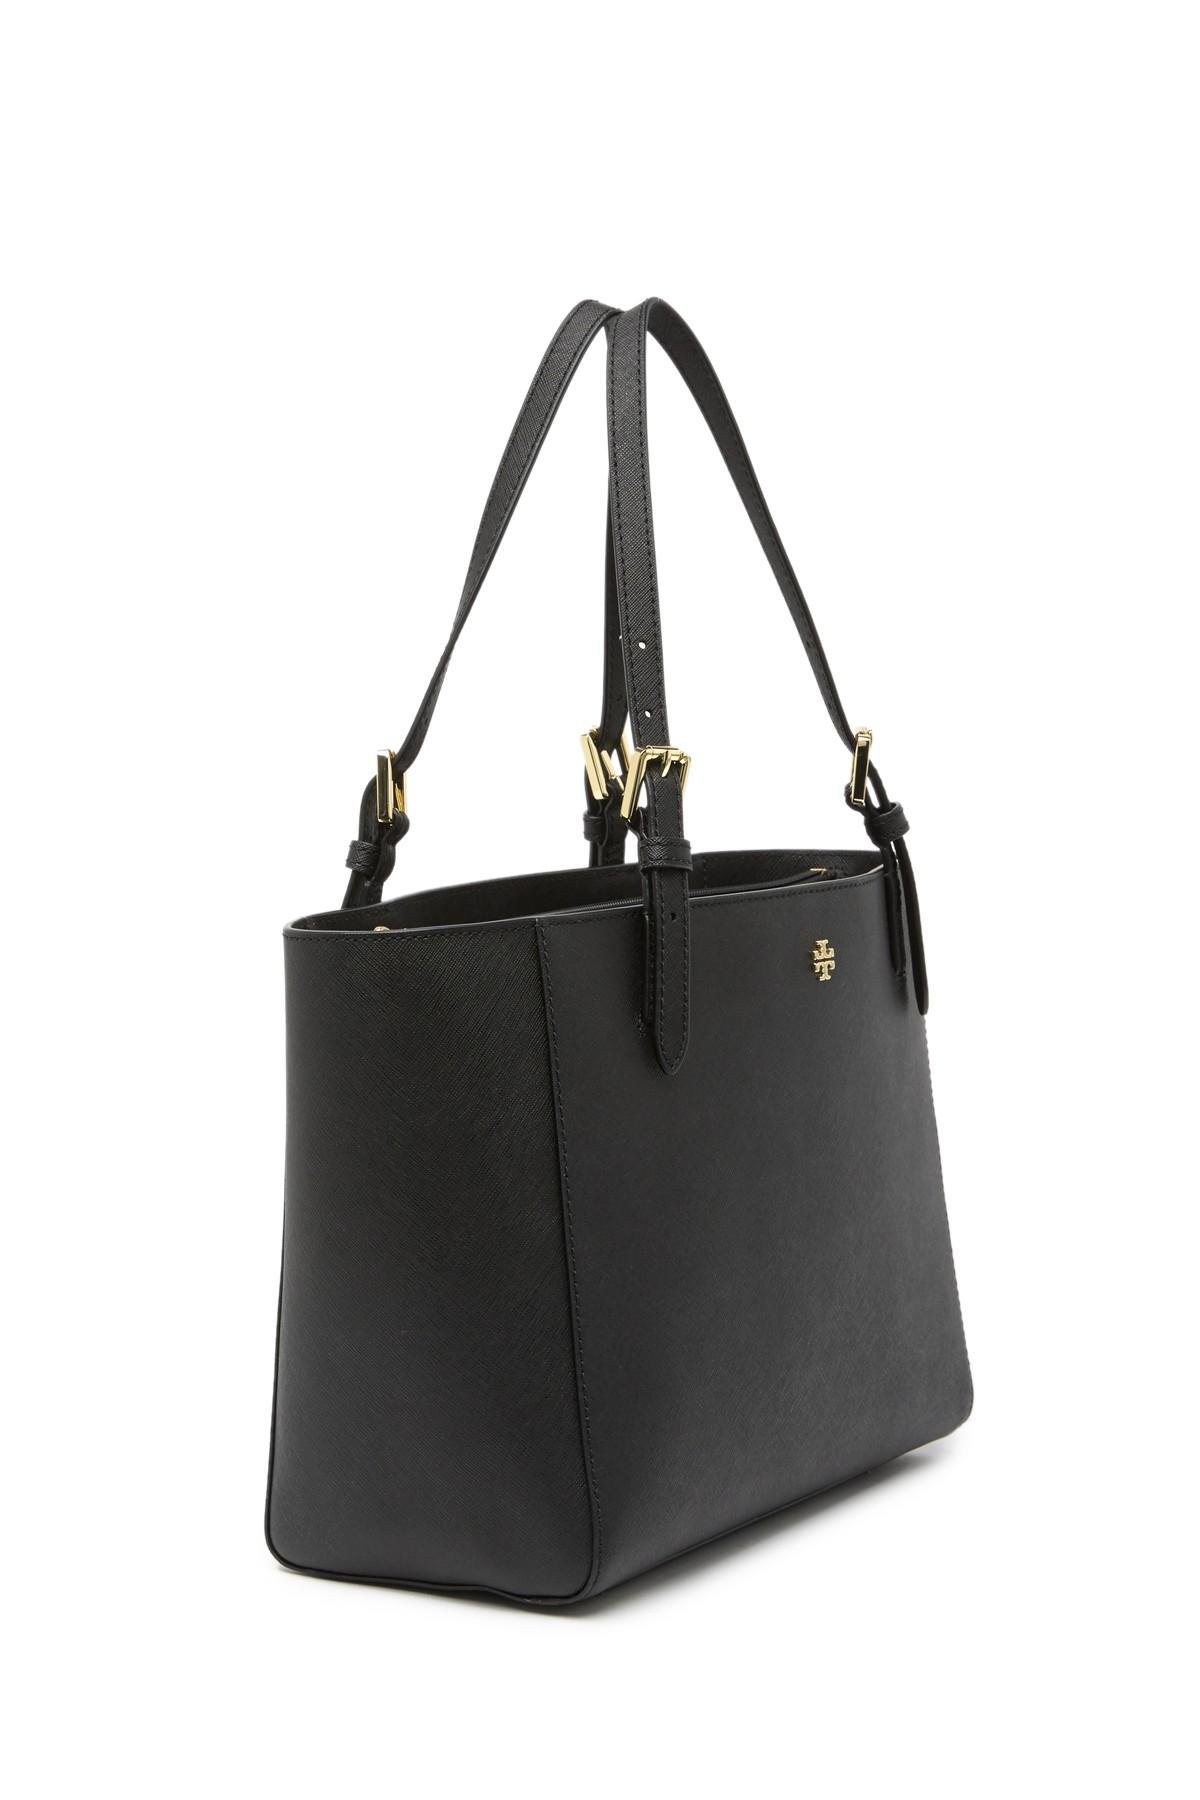 Tory Burch Emerson Medium Tote Black with Gold Hardware